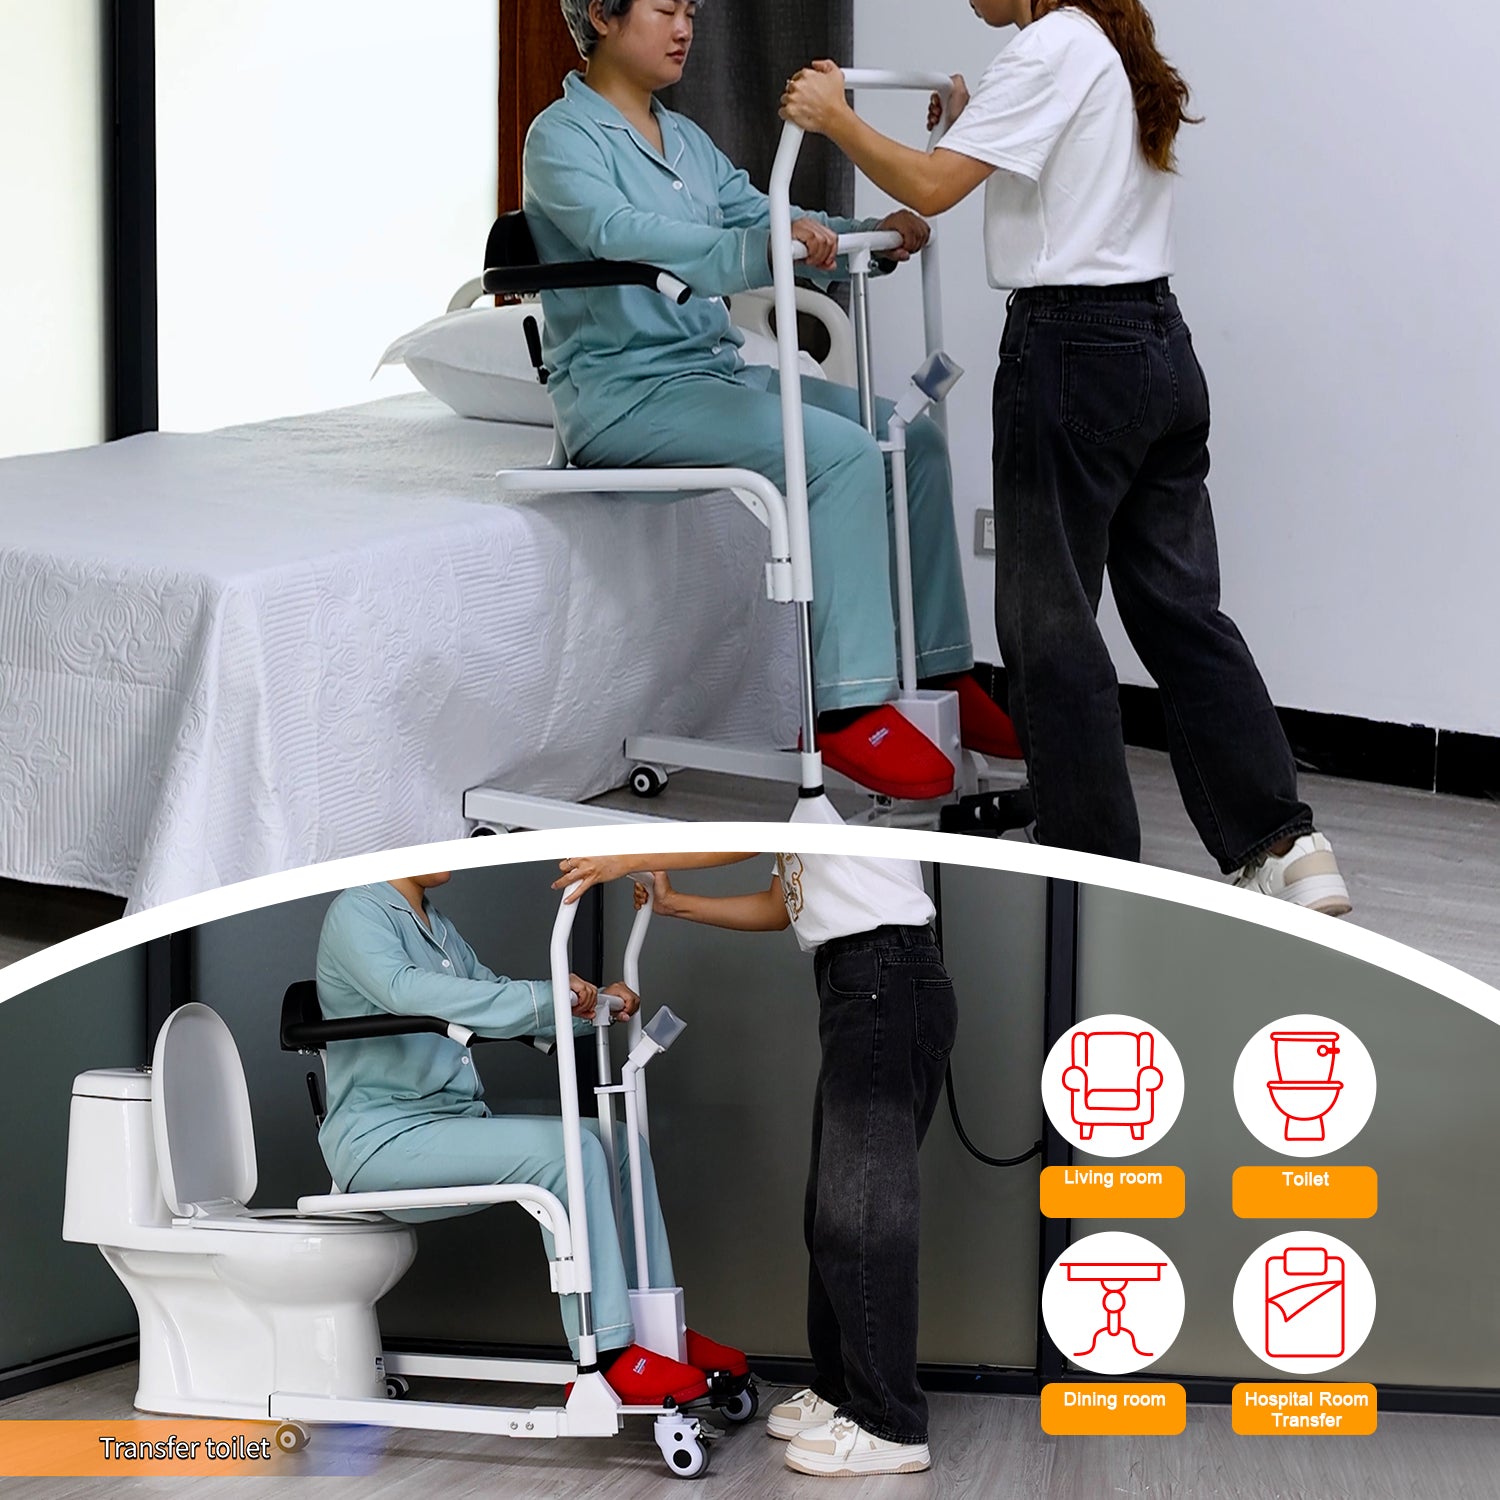 Achairgo Transfer Chair Transforming Patient Mobility and Care